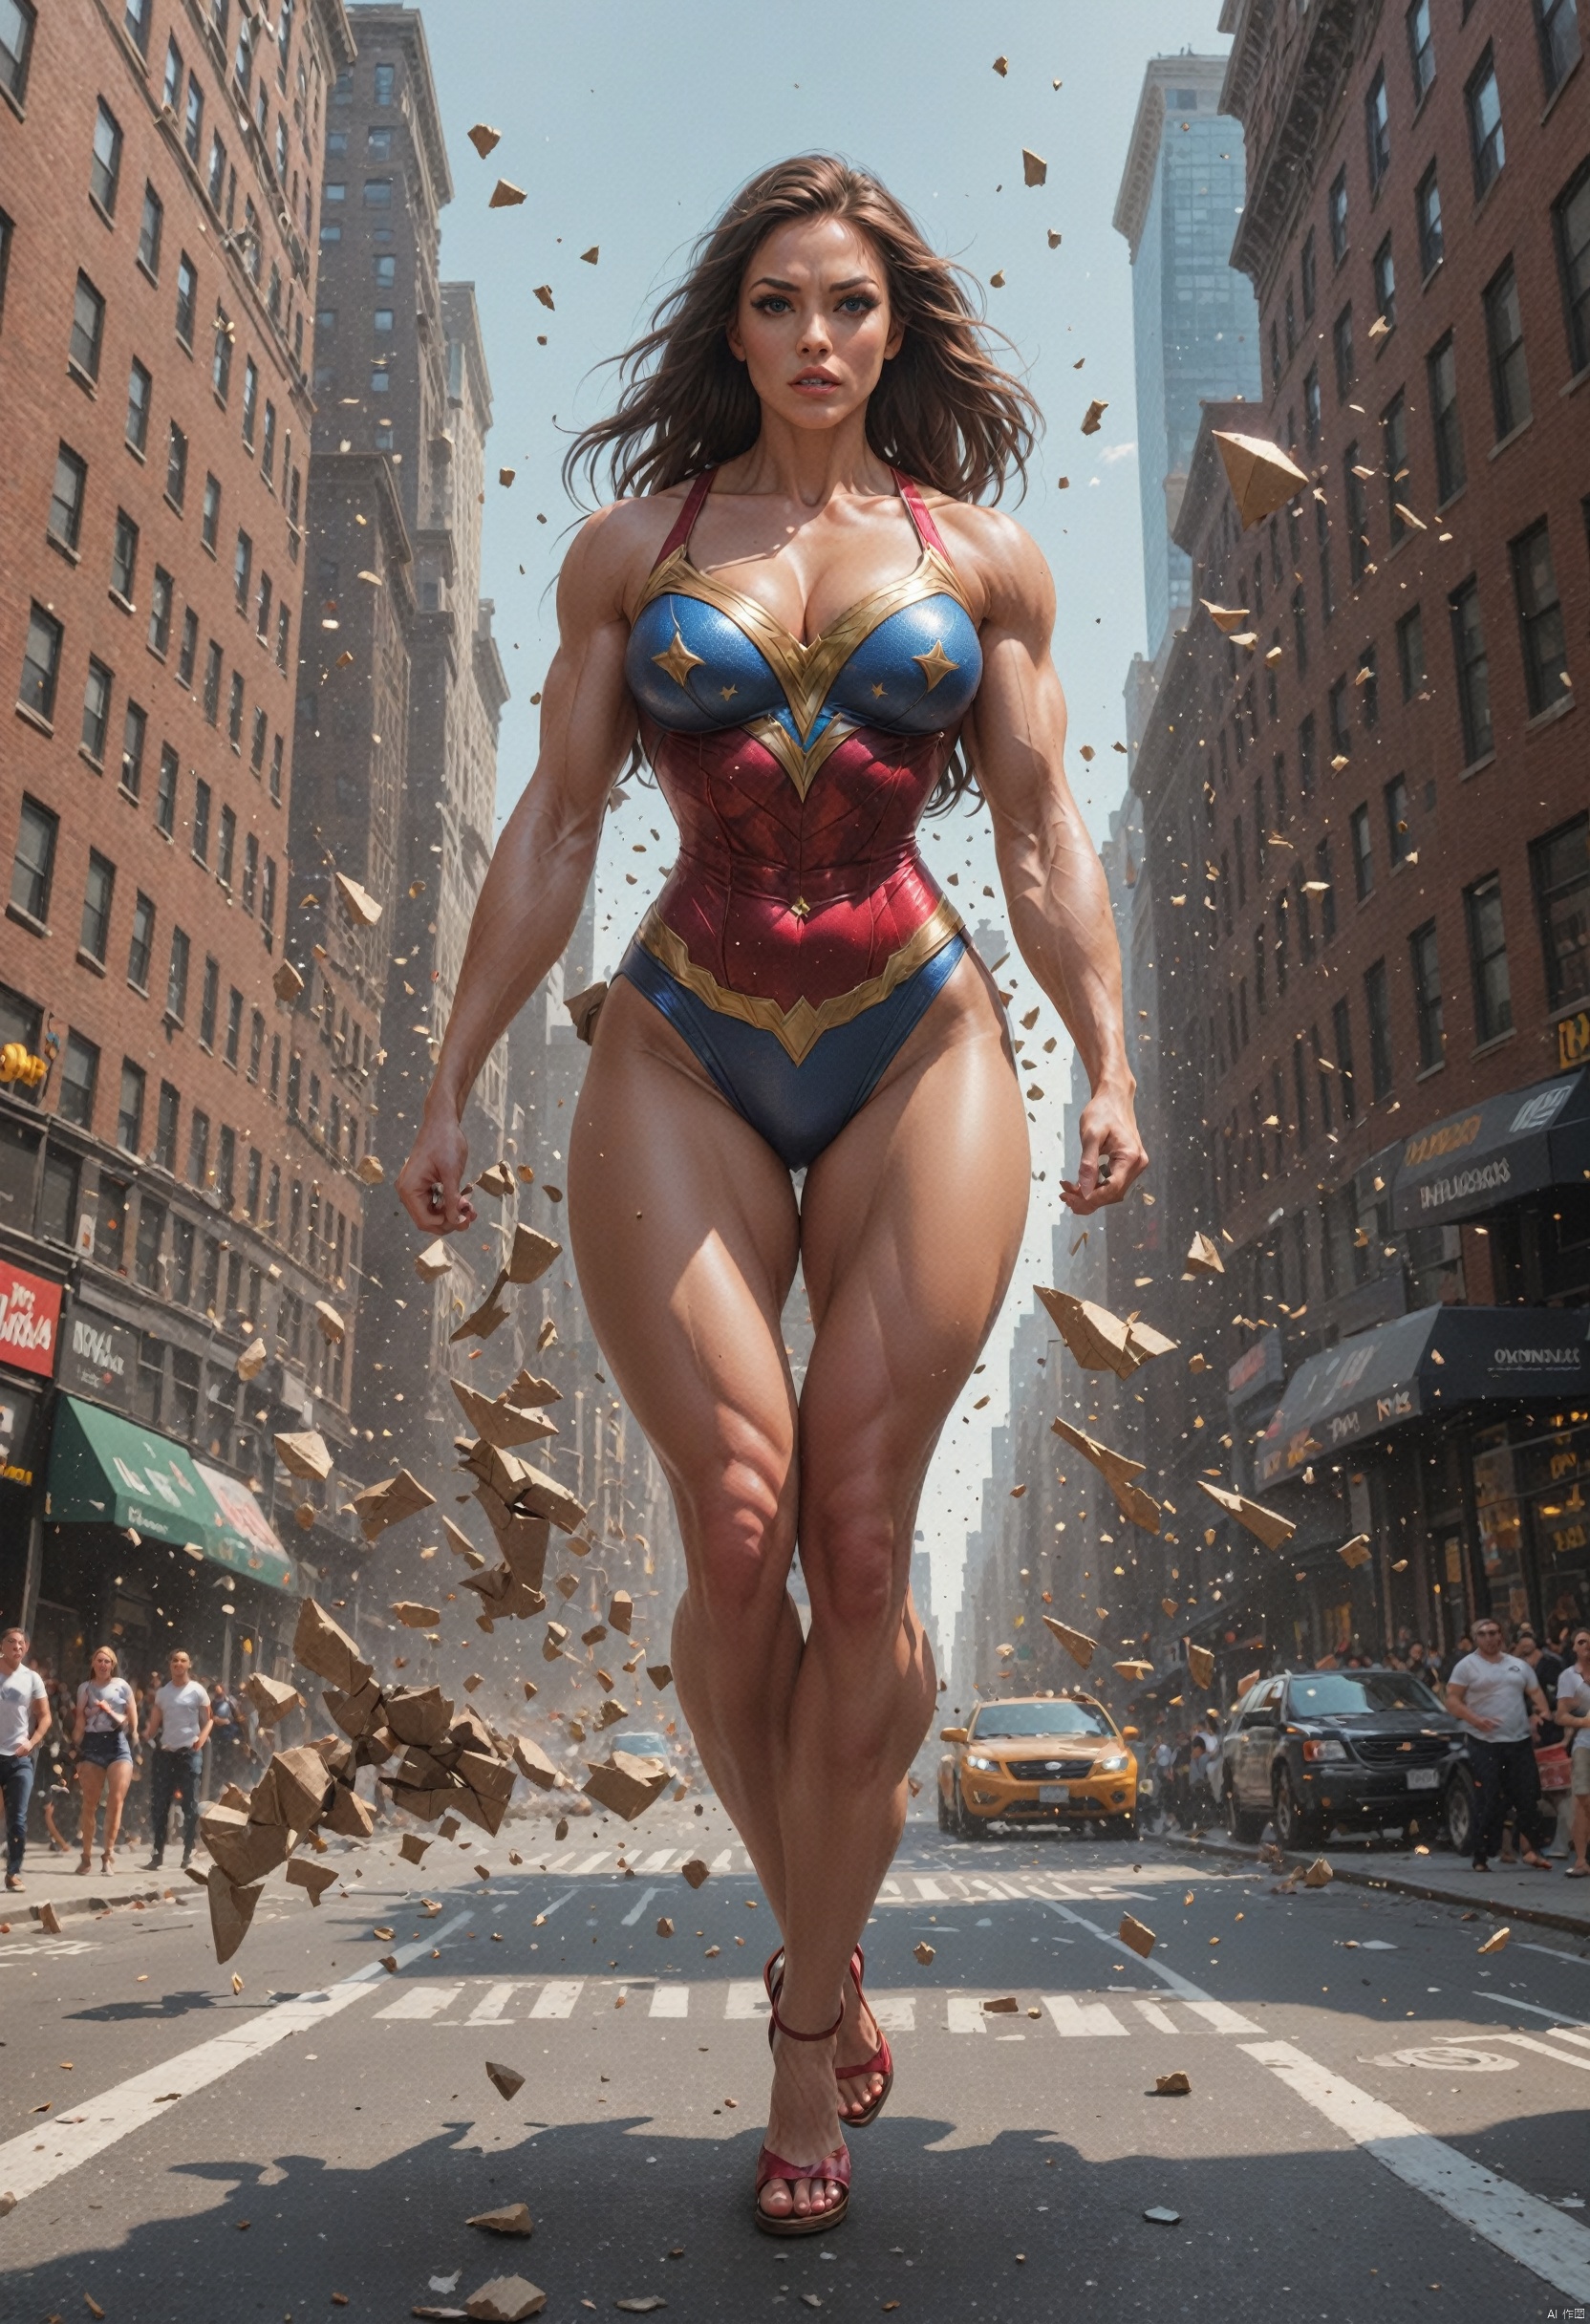  Hyperrealistic photoshoot, a(super woman-flying-high, main-focus), a(busy-New-York-city-street, below, out-of-focus),((monster-falling-down, in-focus)), masterpiece,super detail, Giantess, KALEIDOSHATTER, MUSCLE BIMBO